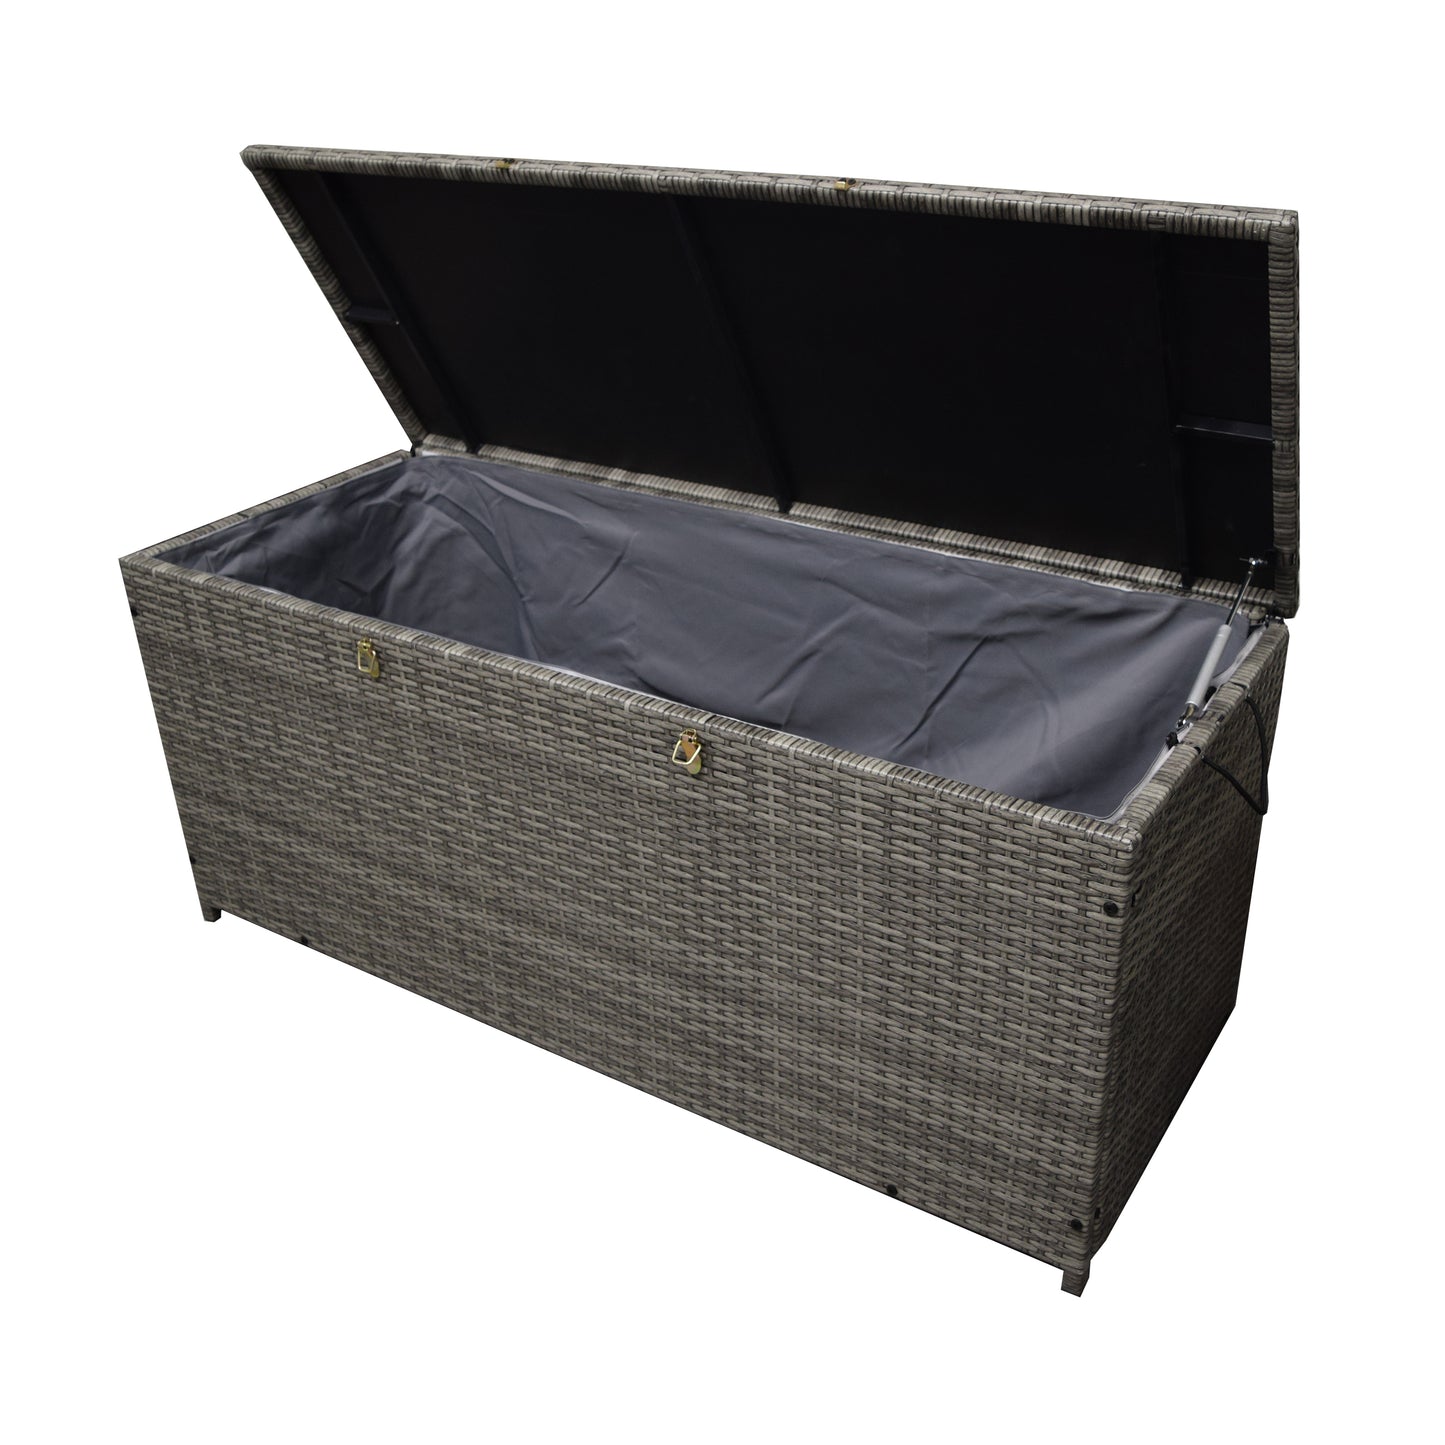 Grey Wicker Patio Deck Box with 113 Gallon Storage and Metal Frame